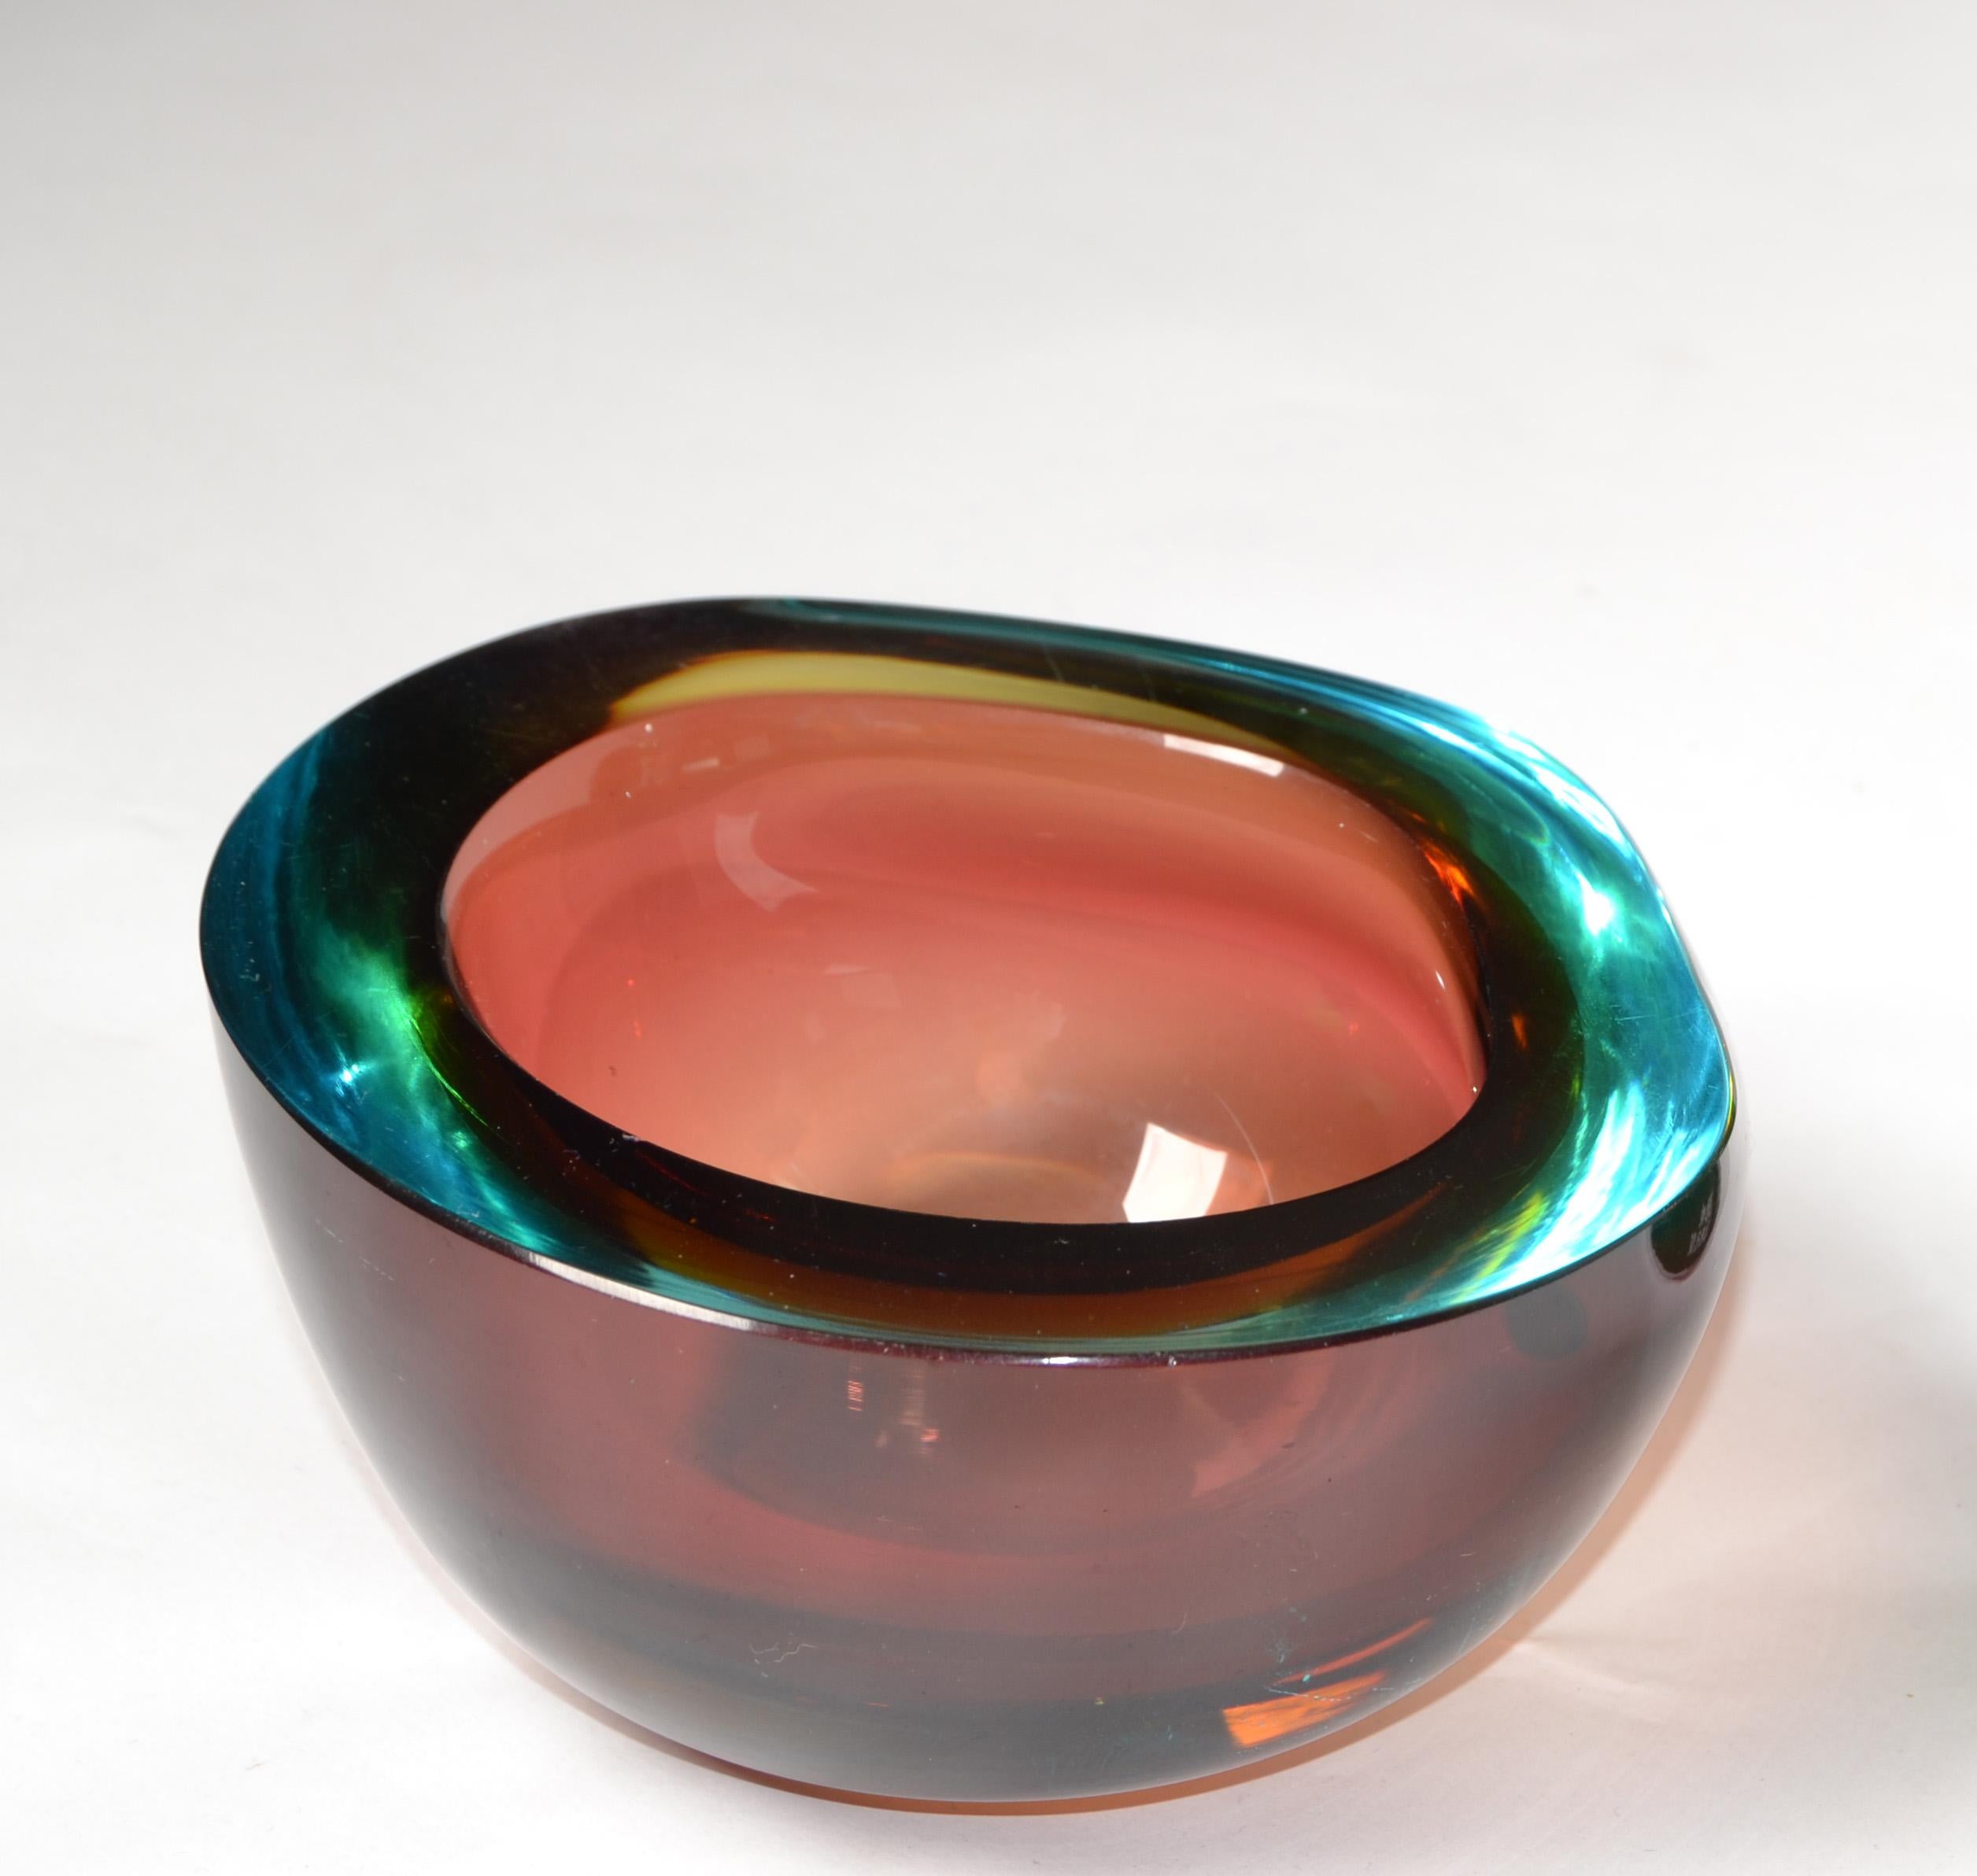 Mid-Century Modern Murano art glass bowl in amber and green, blown glass catchall, made in Italy.
Heavy glass bowl with outstanding details. Looks great on an entry Hallway Console Table, Sideboard or as a ring dish on Top of a Dresser.